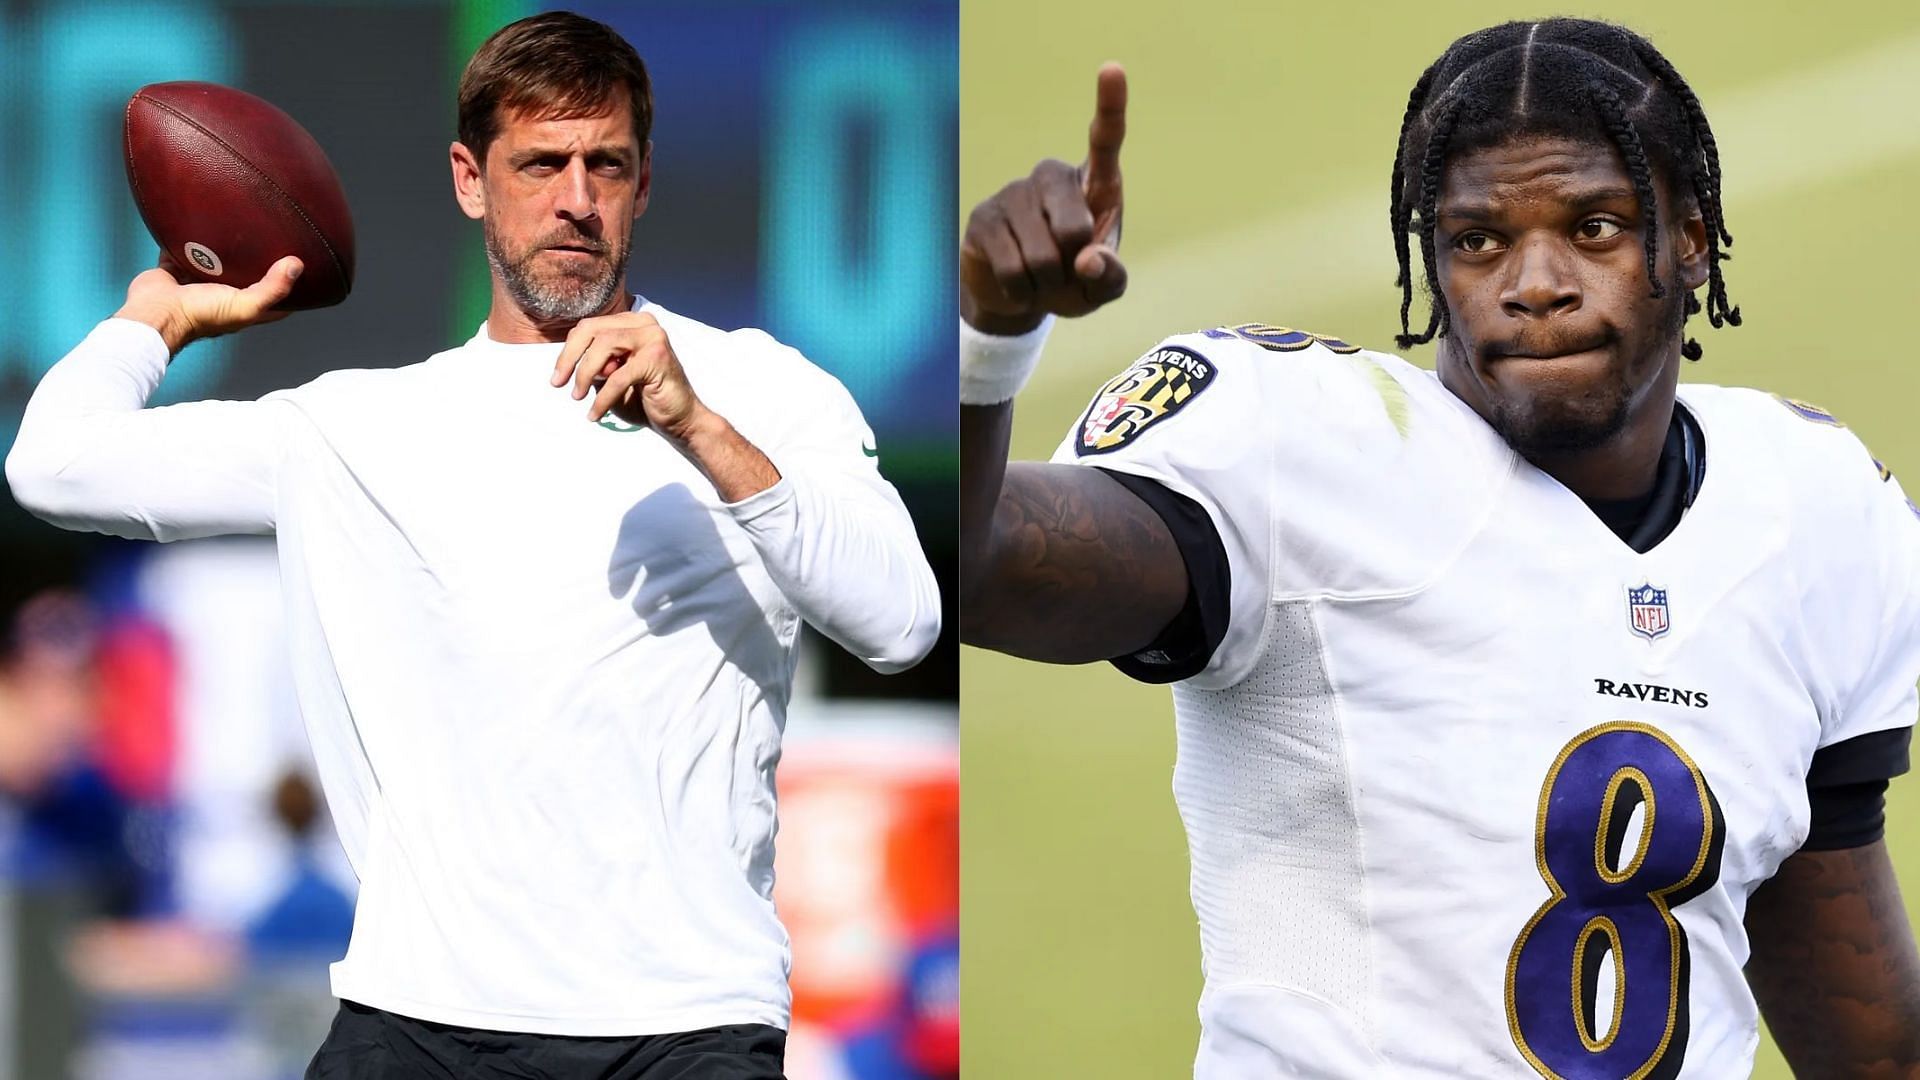 Quarterback Aaron Rodgers was successful in getting his trade request granted while Lamar Jackson didn